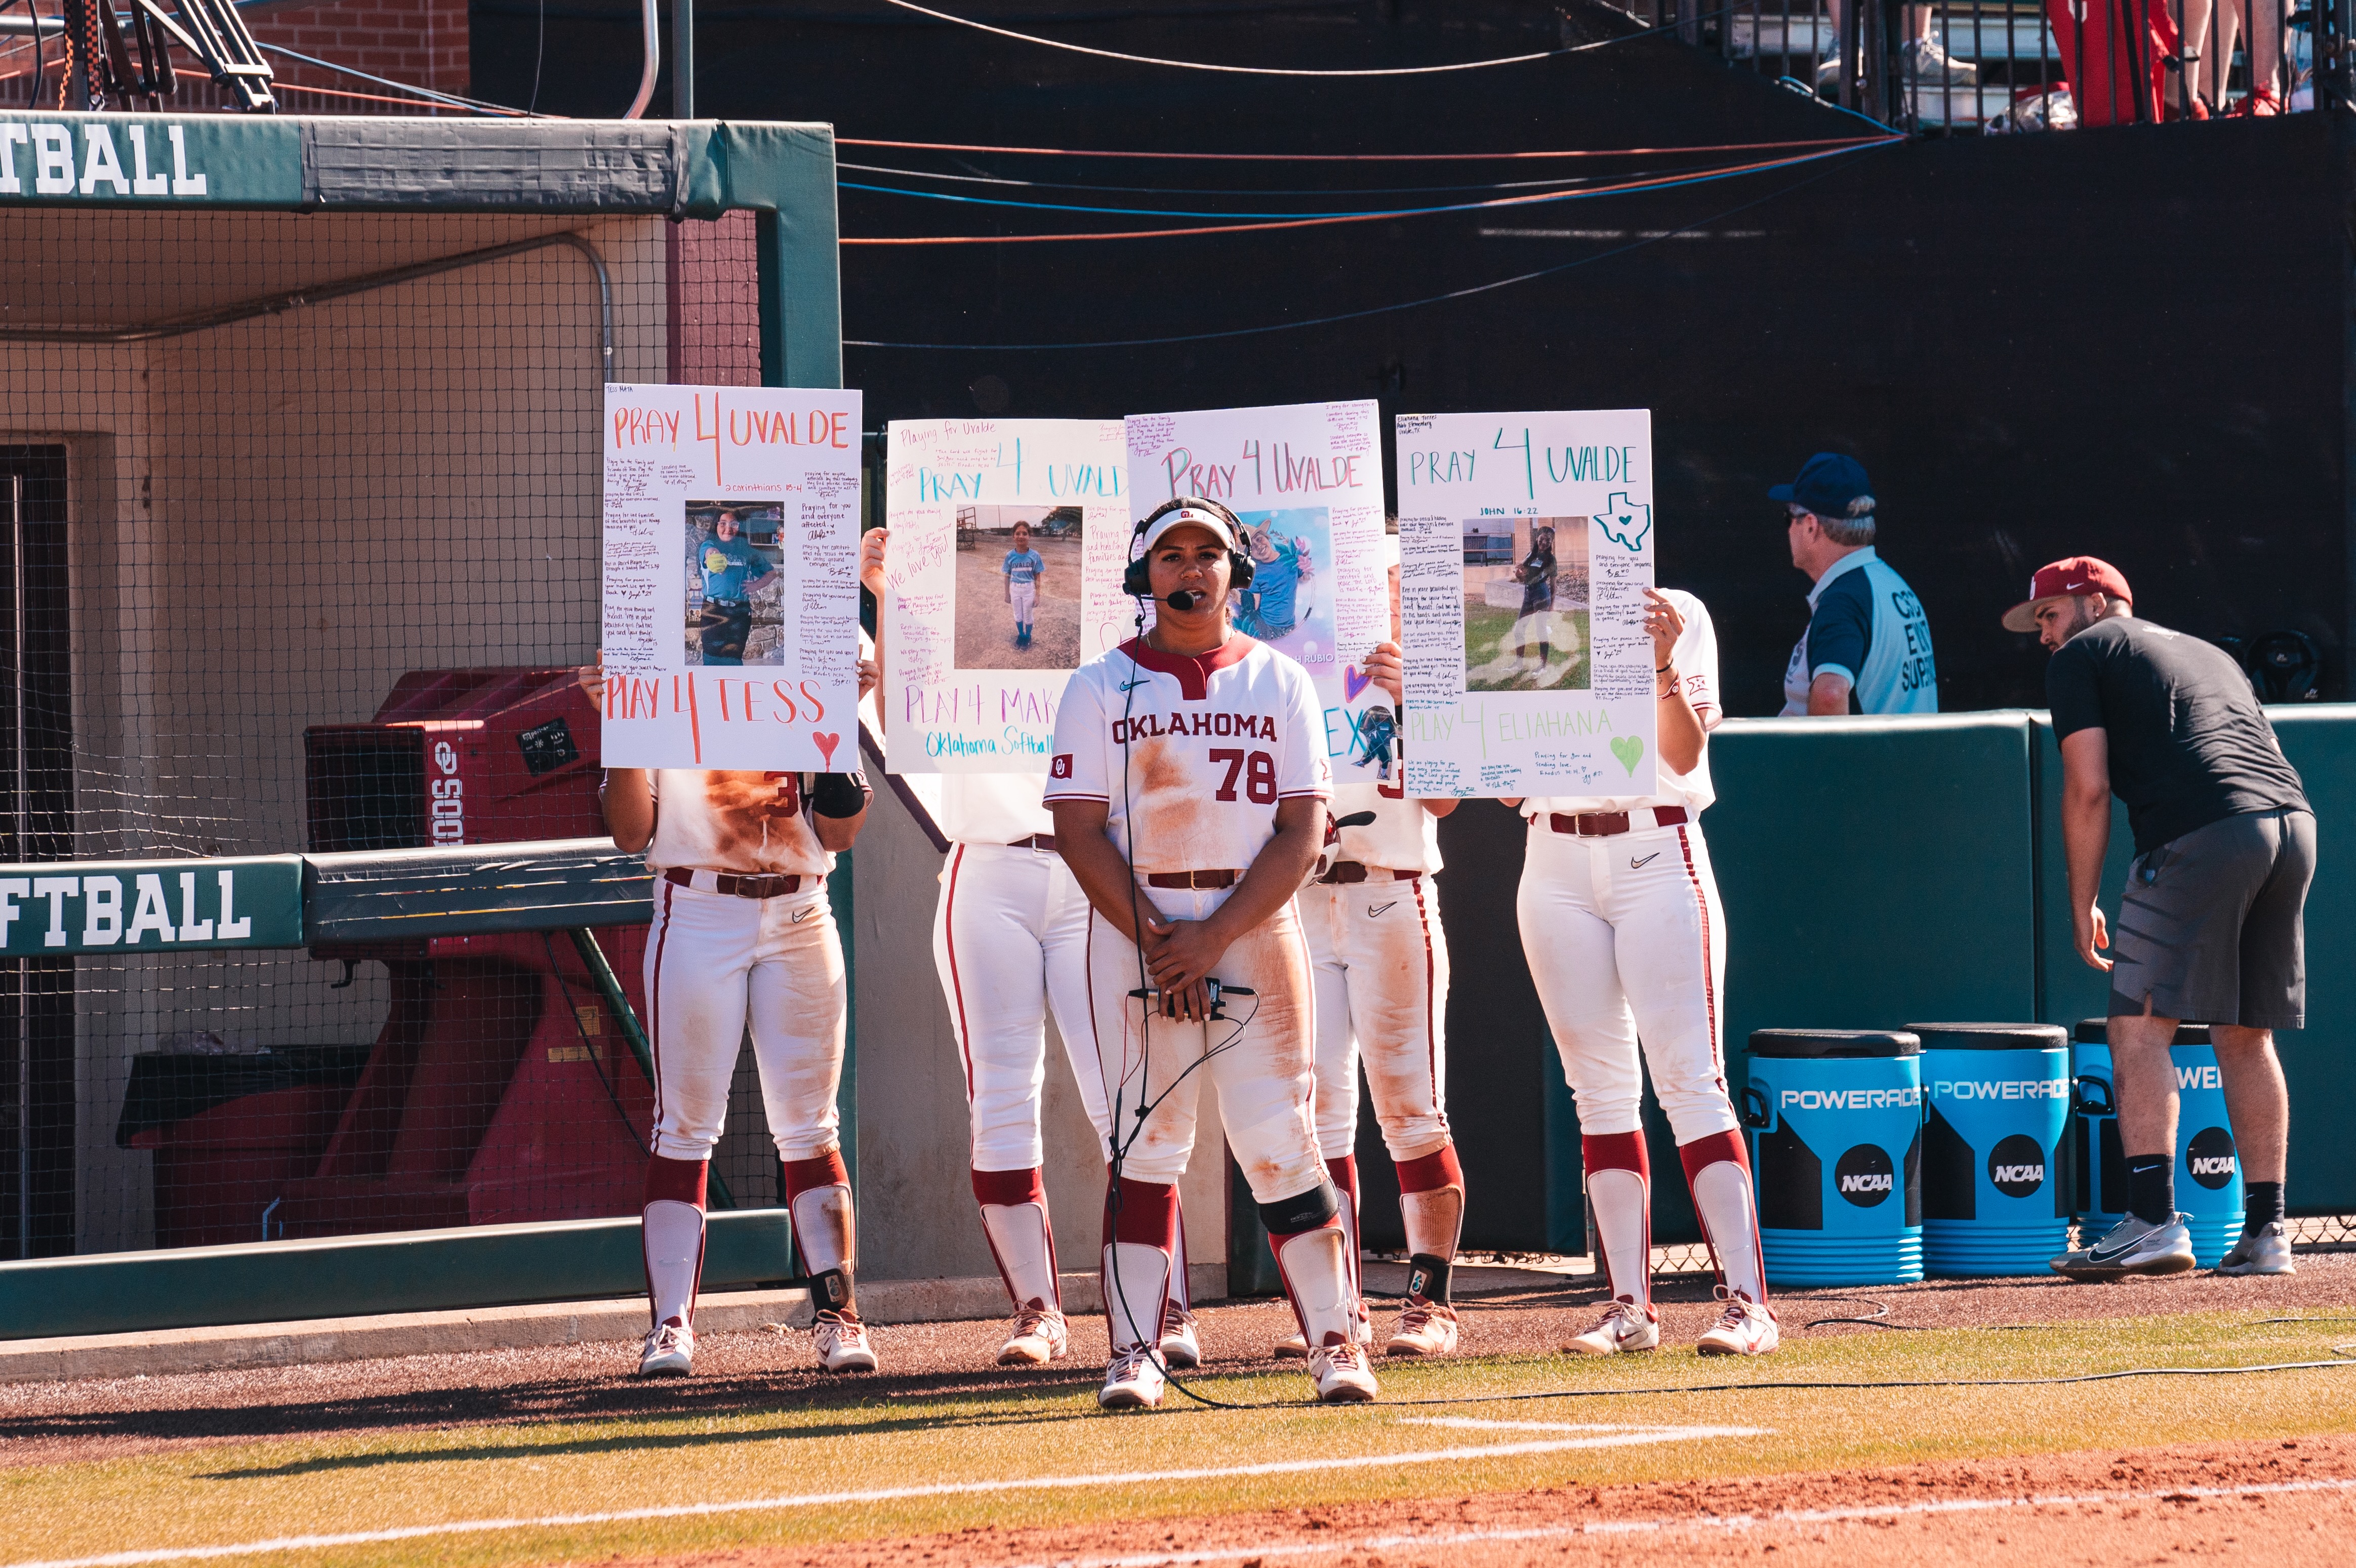 In the Wake of Tragedy, Oklahoma Softball is Playing for Something More